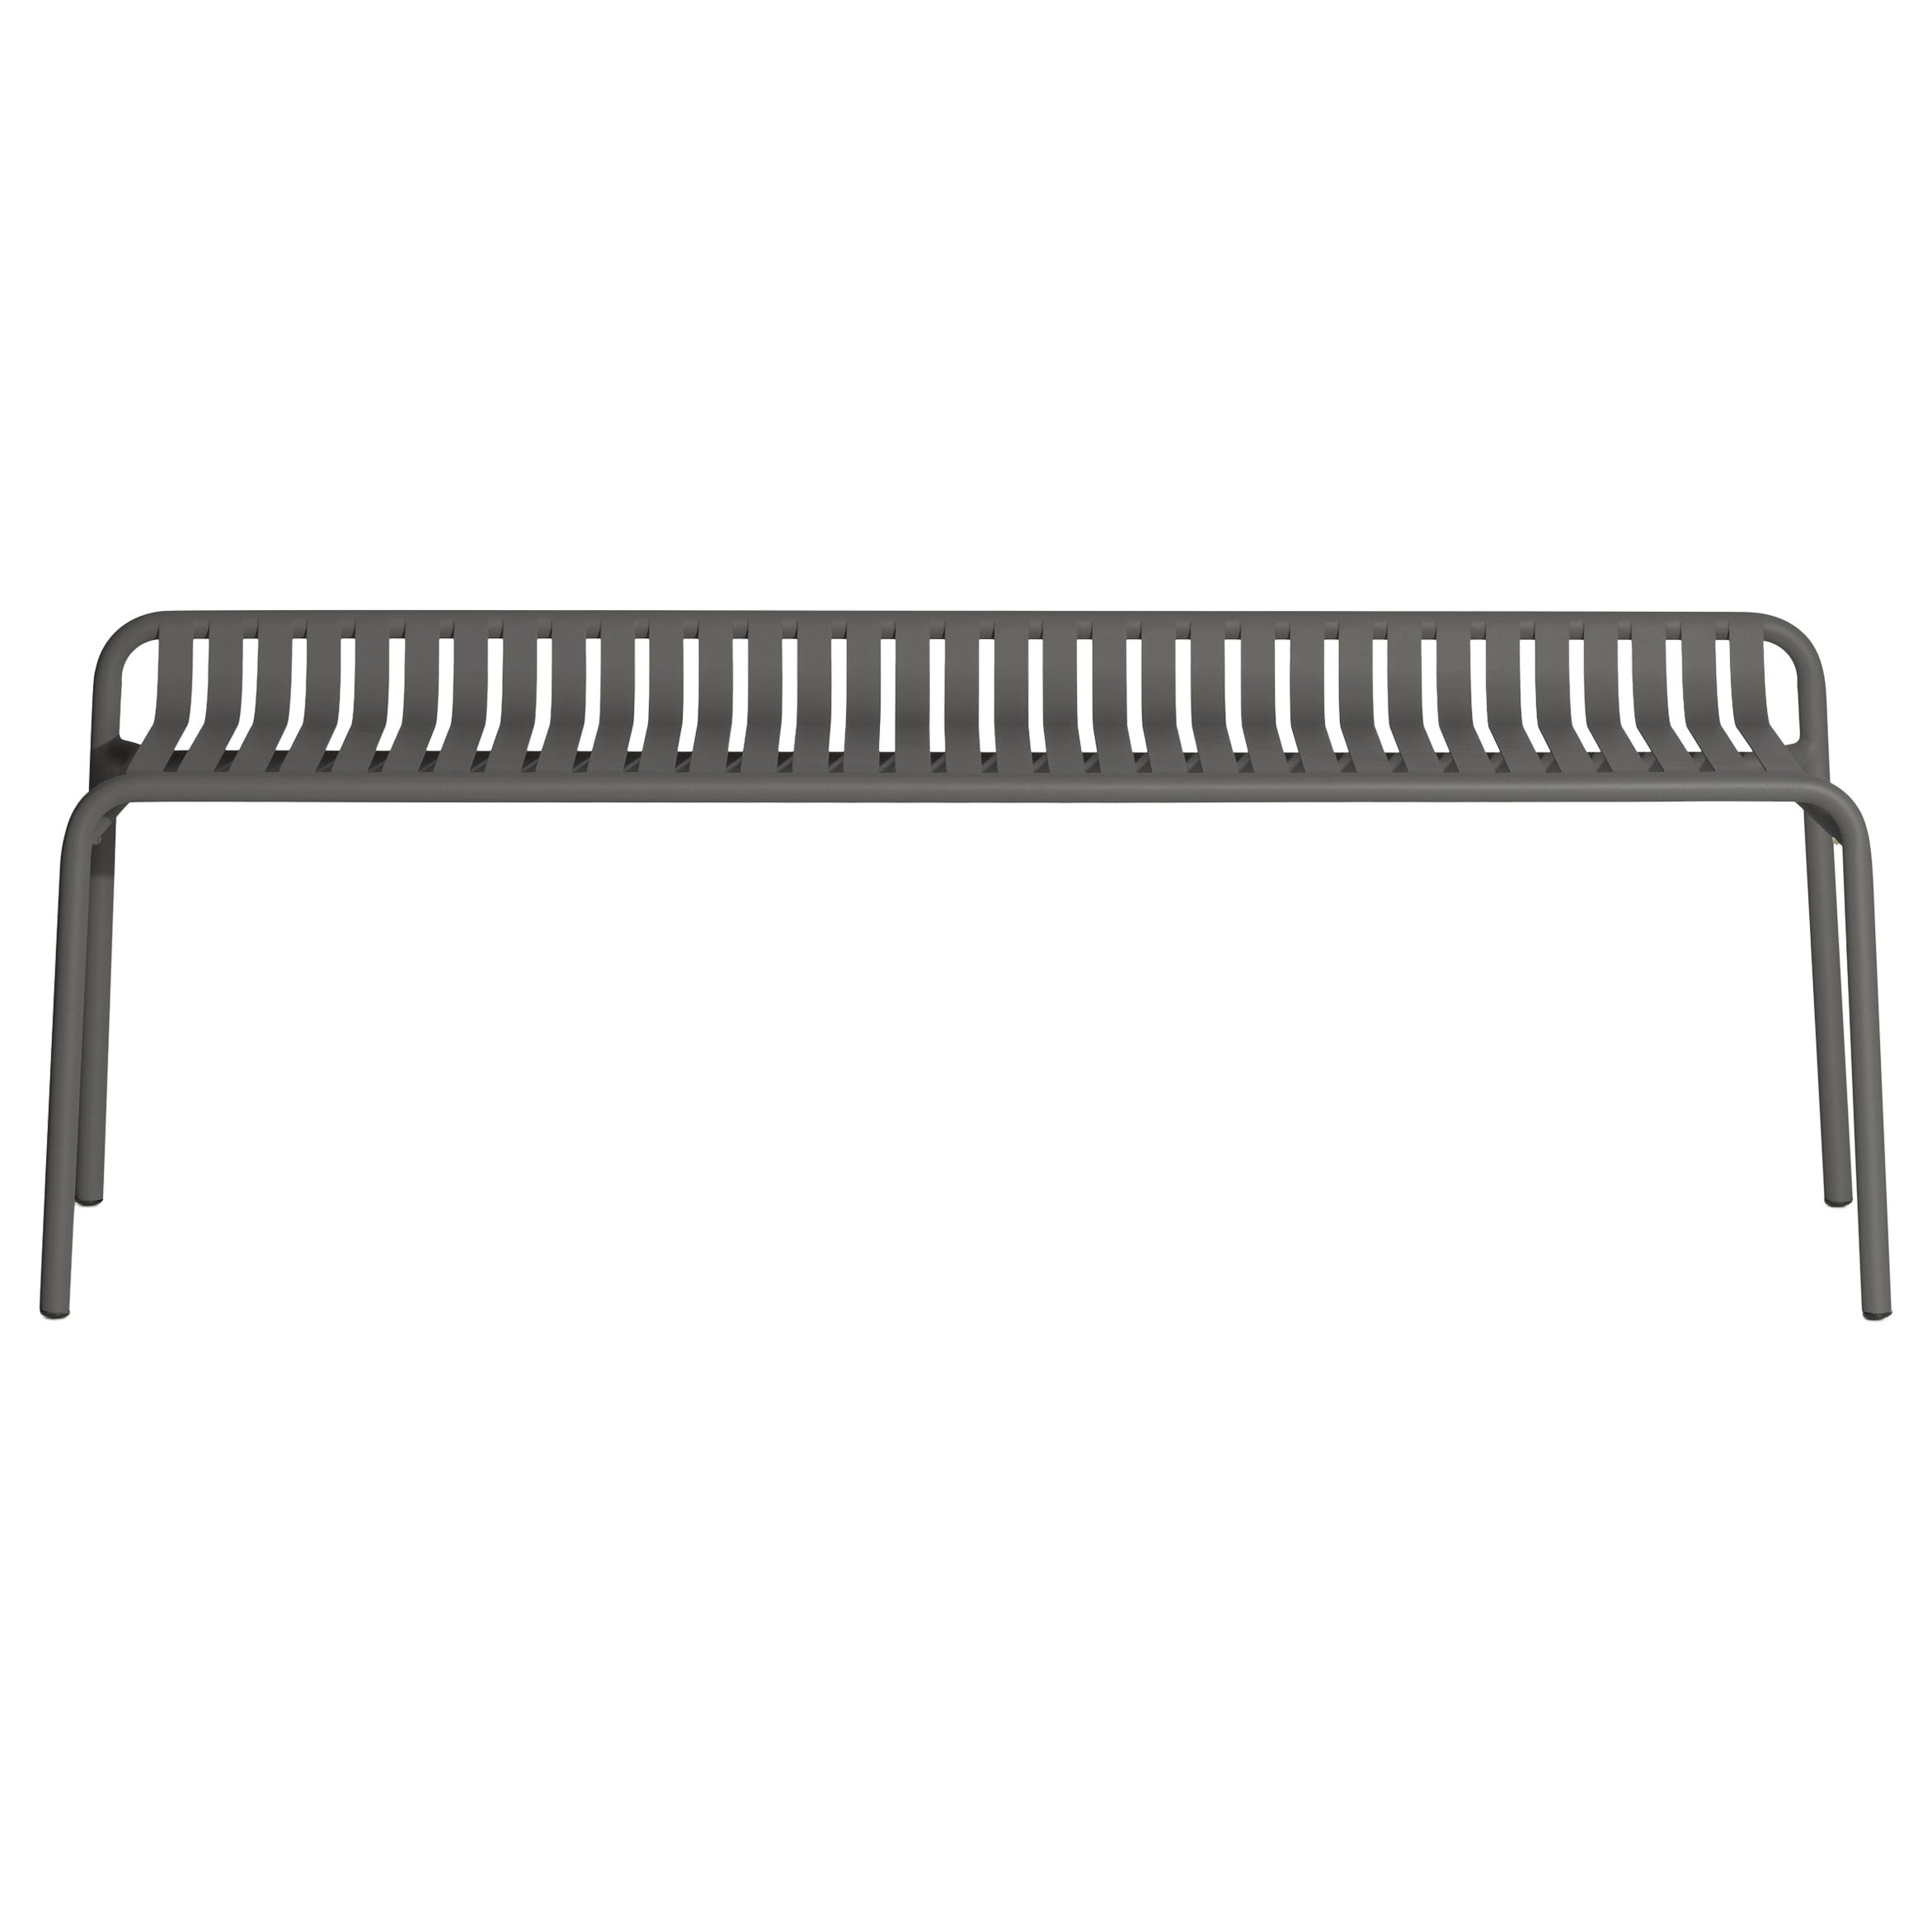 Petite Friture Week-End Bench without Back in Anthracite Aluminium, 2017 